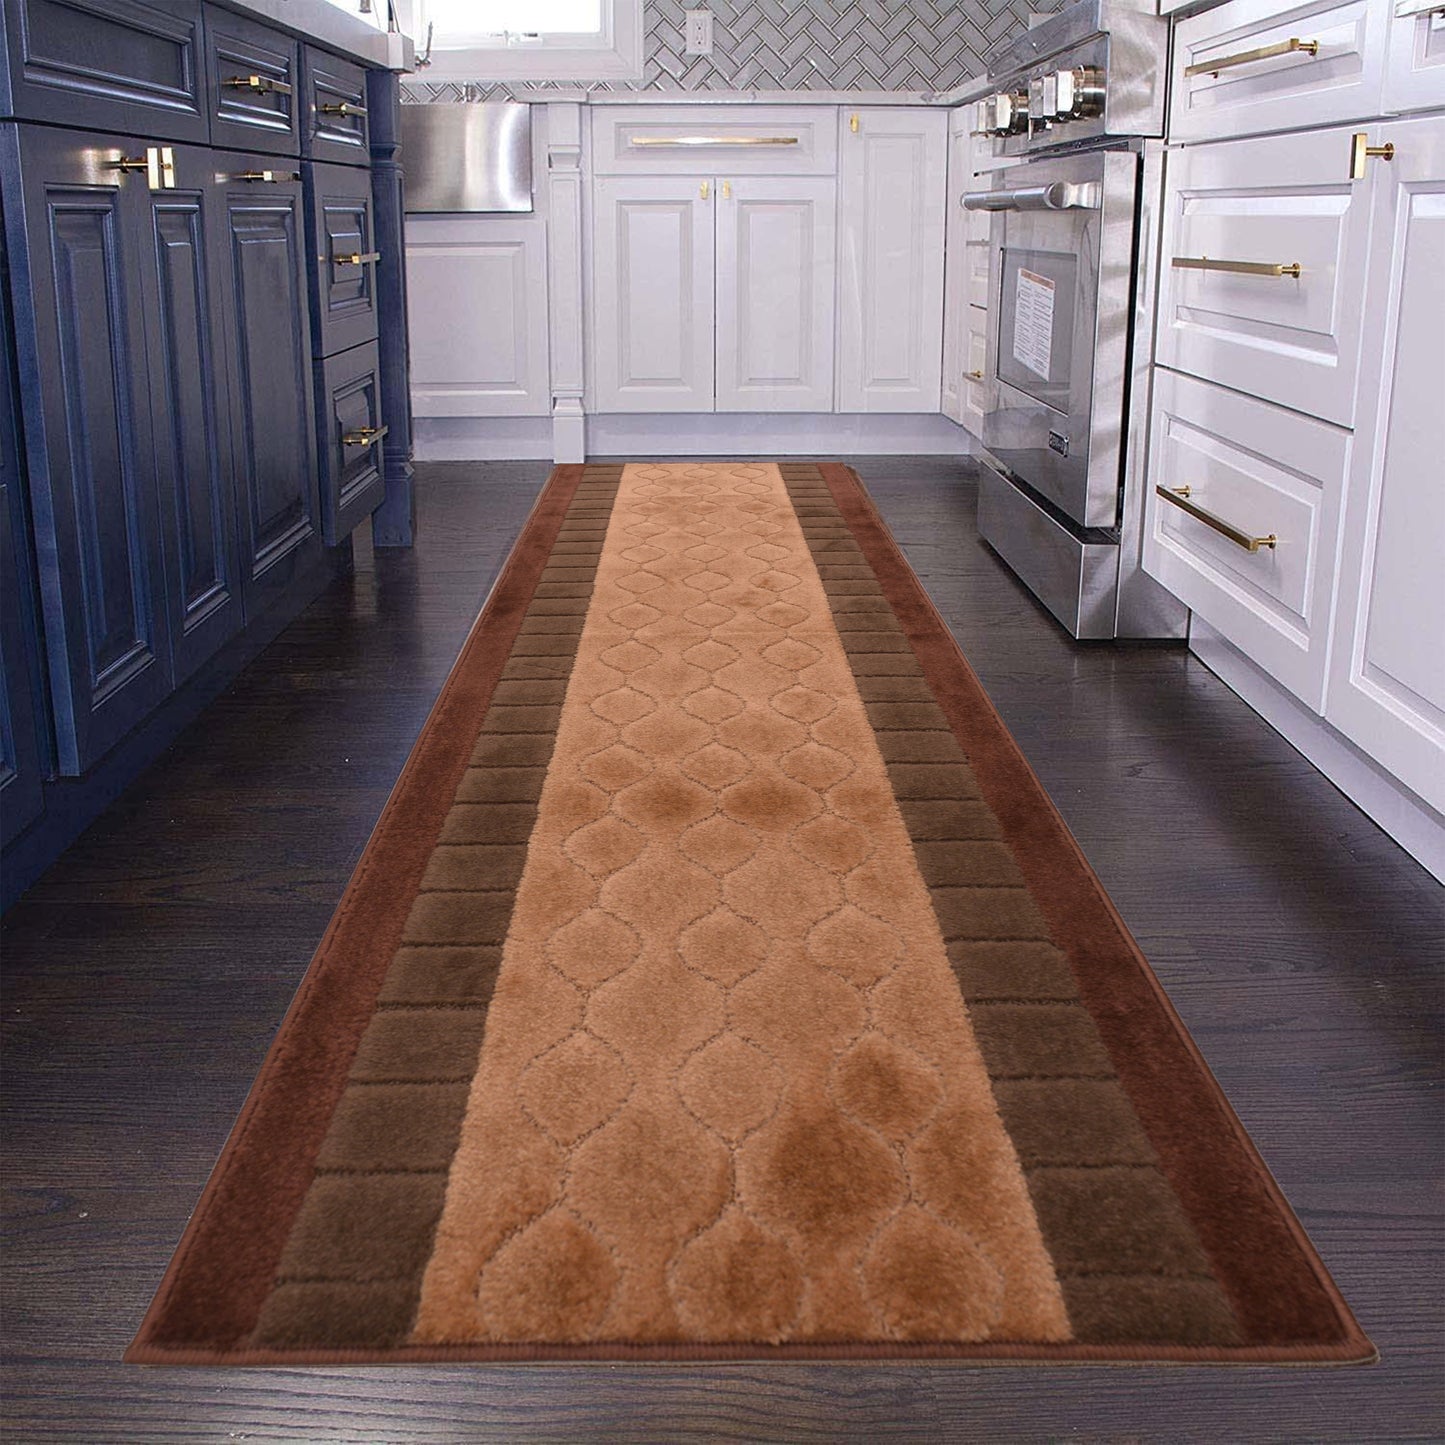 Custom Size Runner Rug Volley Circle Beige-Brown Color Skid Resistant Rug Runner Customize Up to 50 Feet and 26 Inch Width Cut to Size Rugs